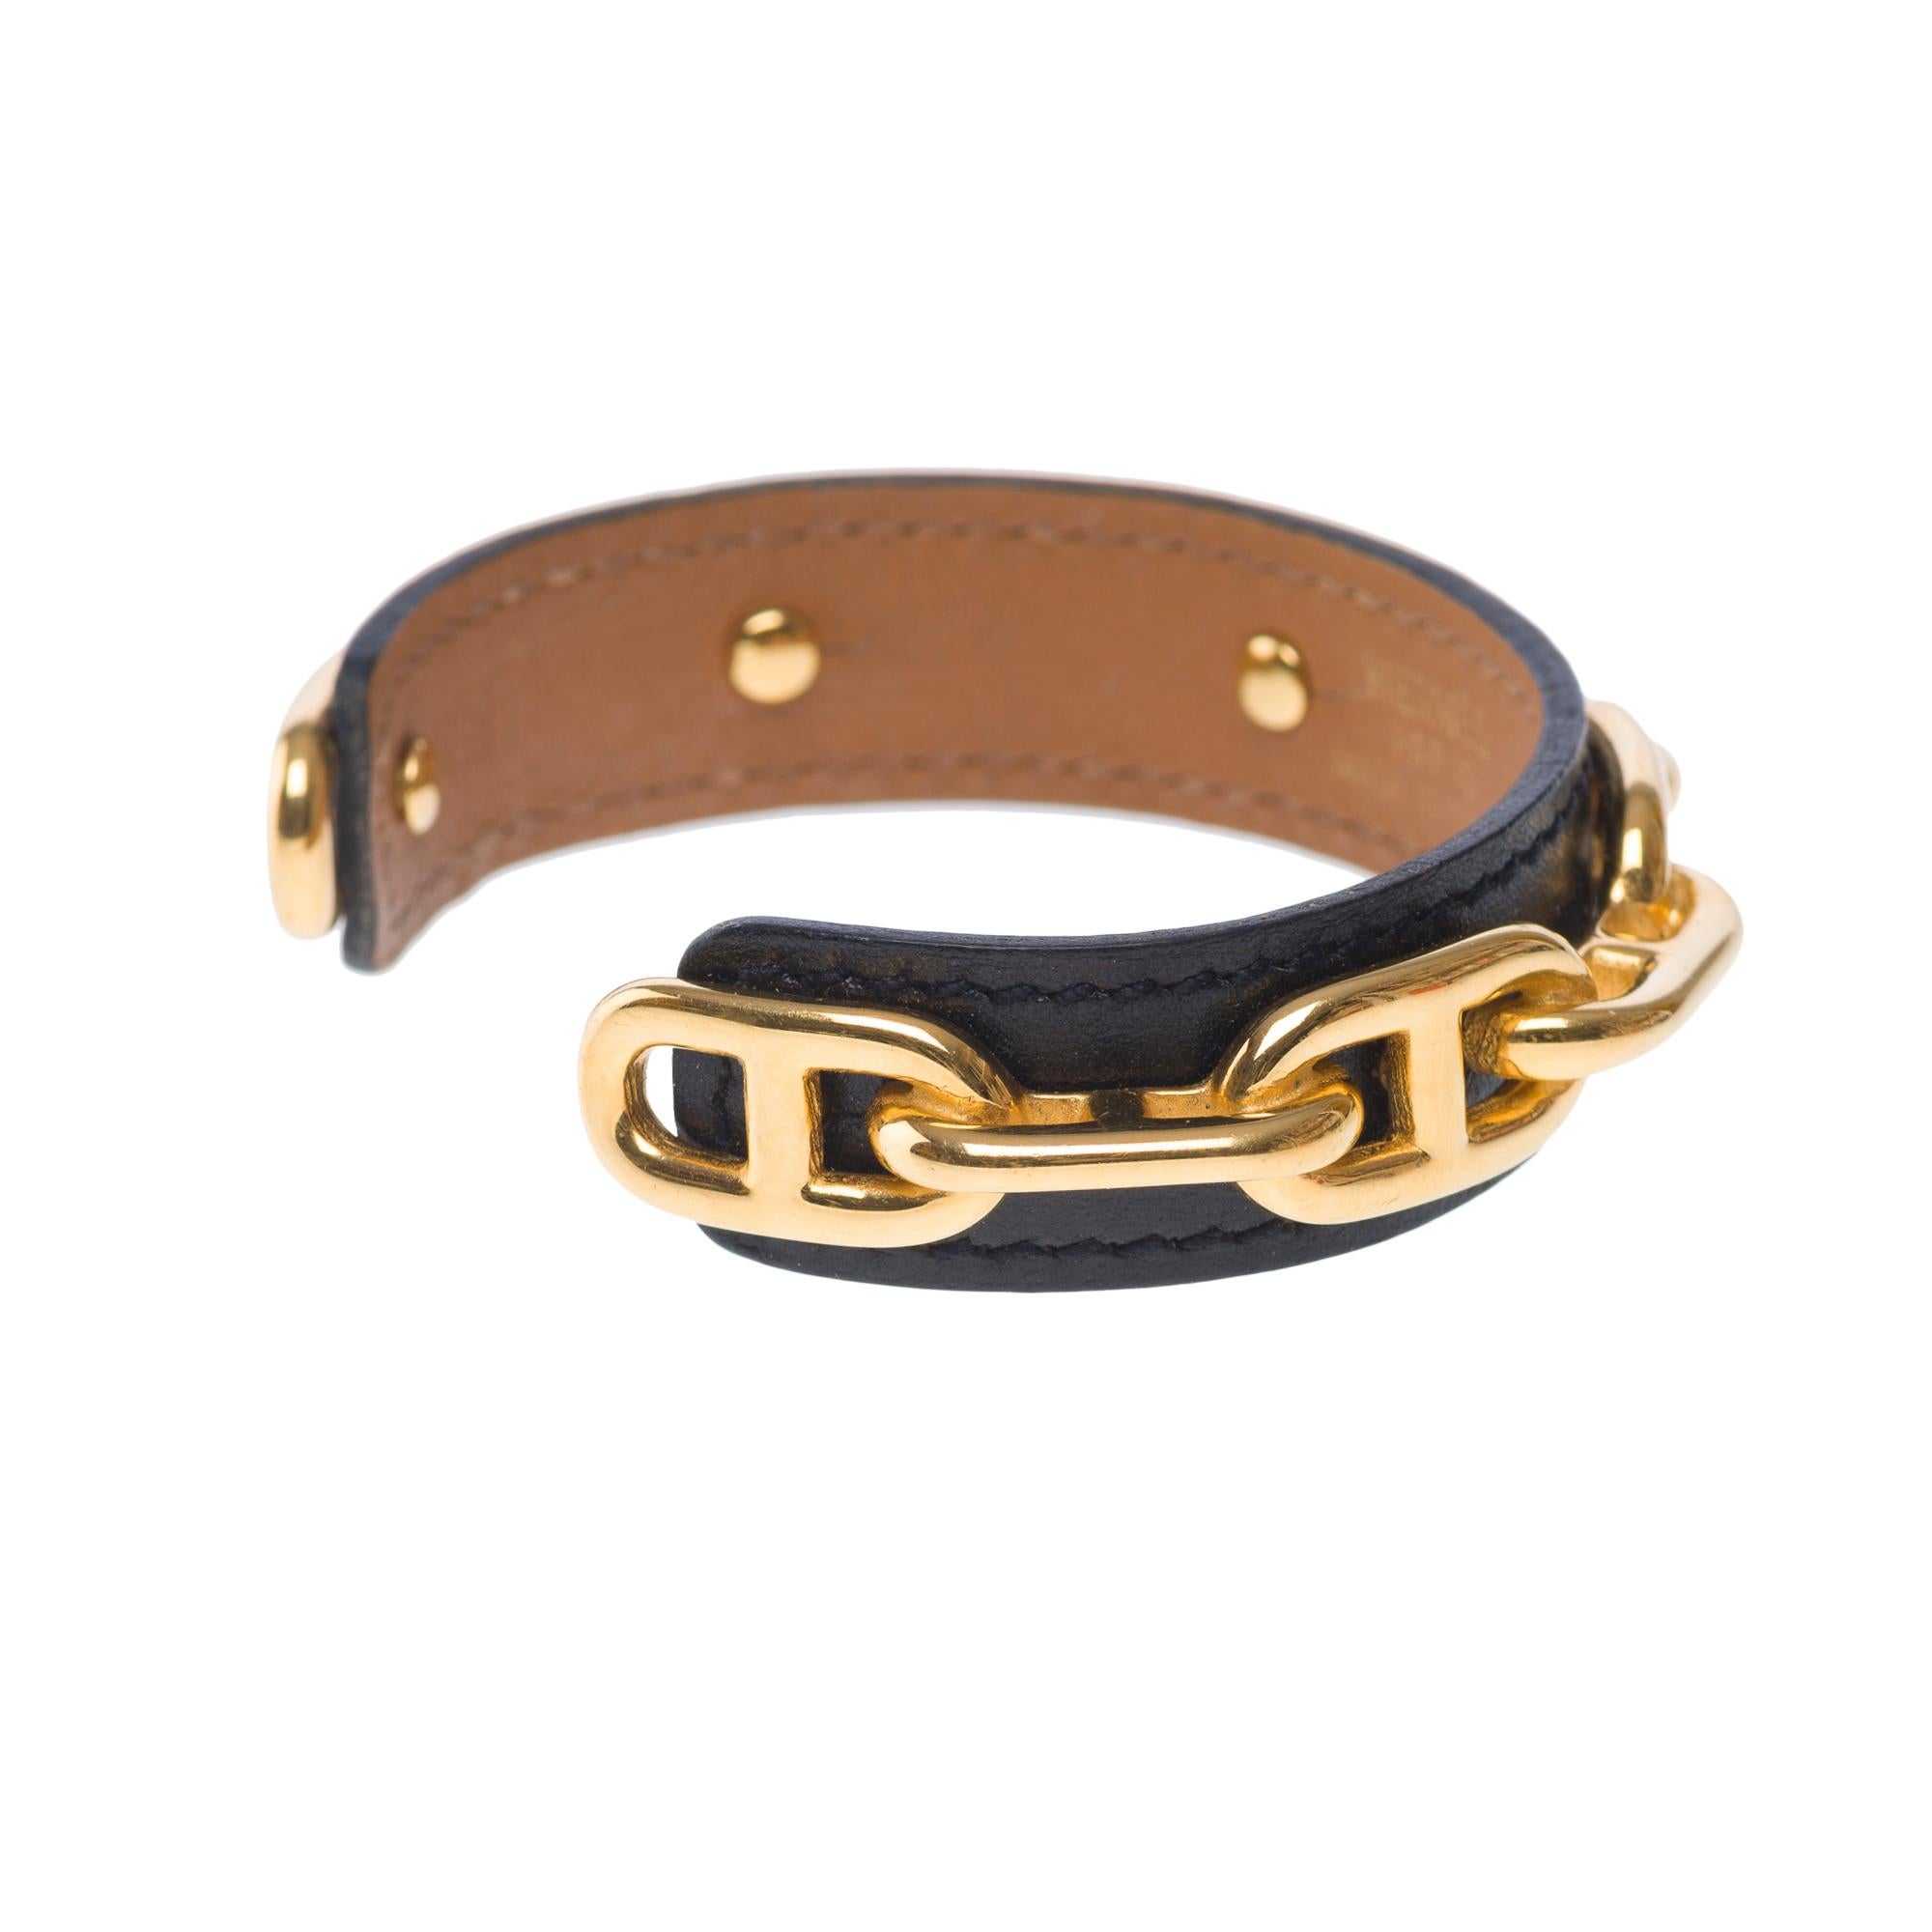 Very Chic Hermès Chaine D'Ancre bracelet in black leather, GHW 2